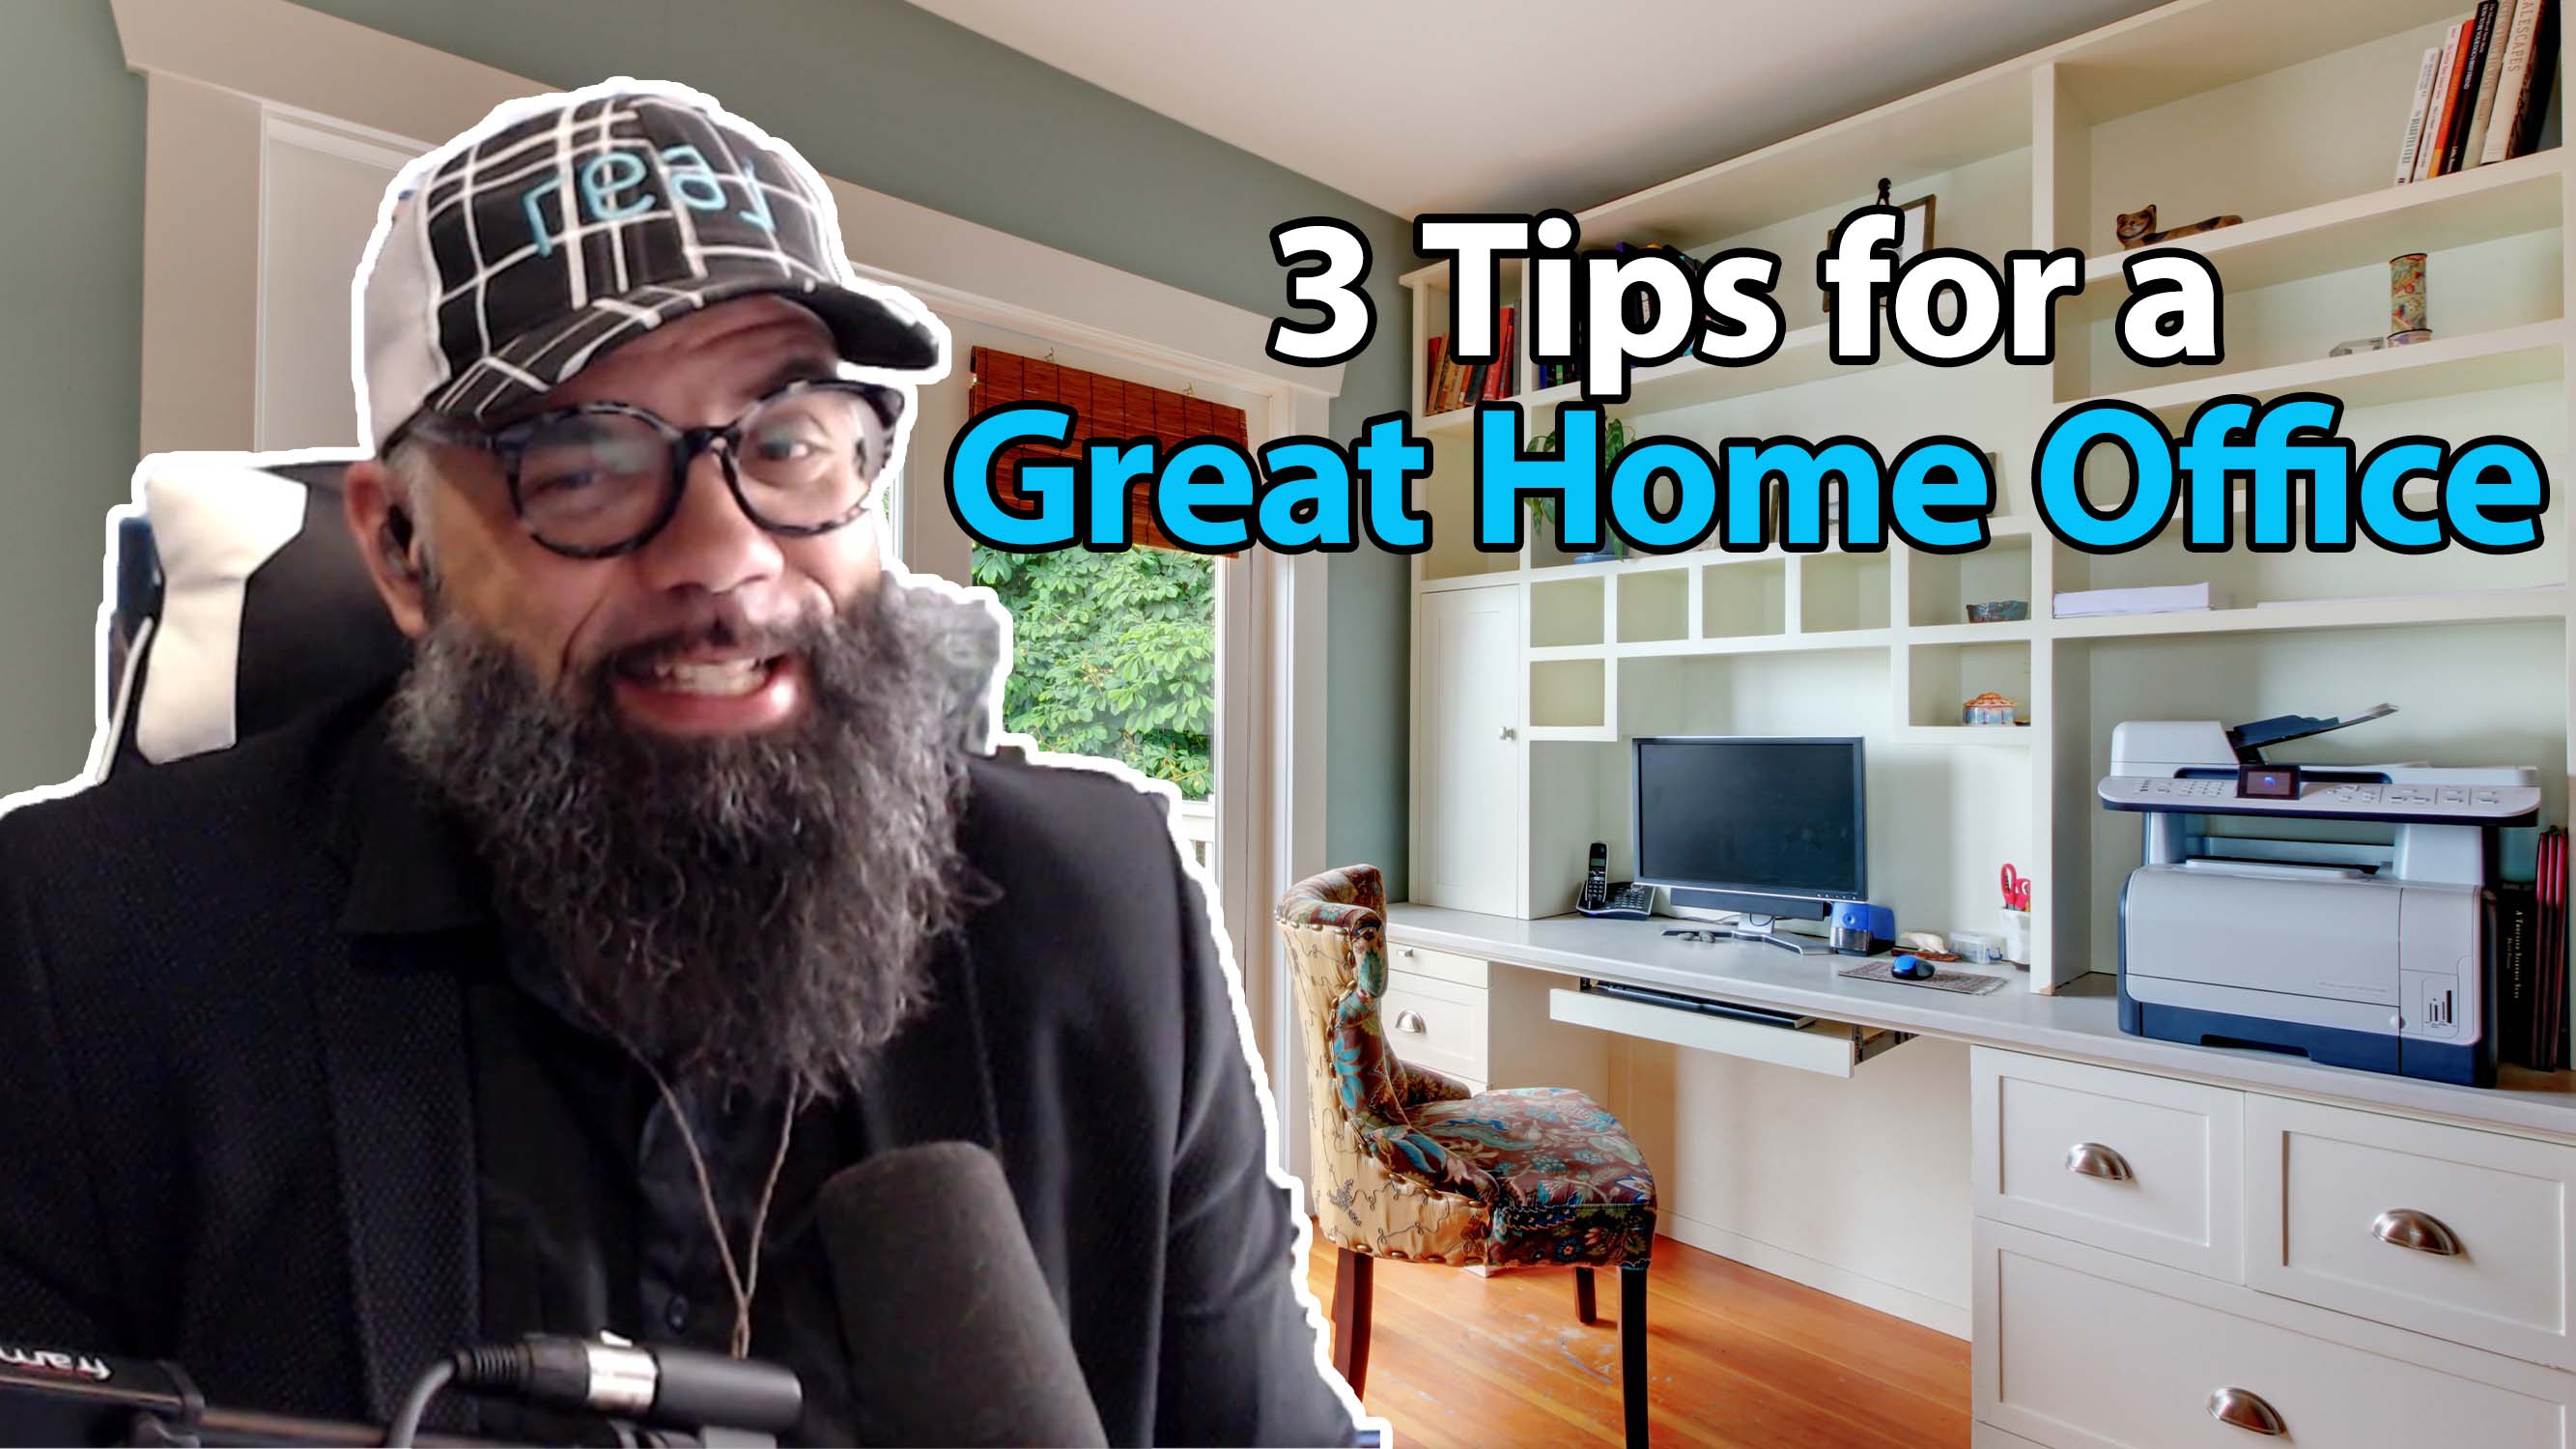 Get a Great Home Office With These 3 Tips